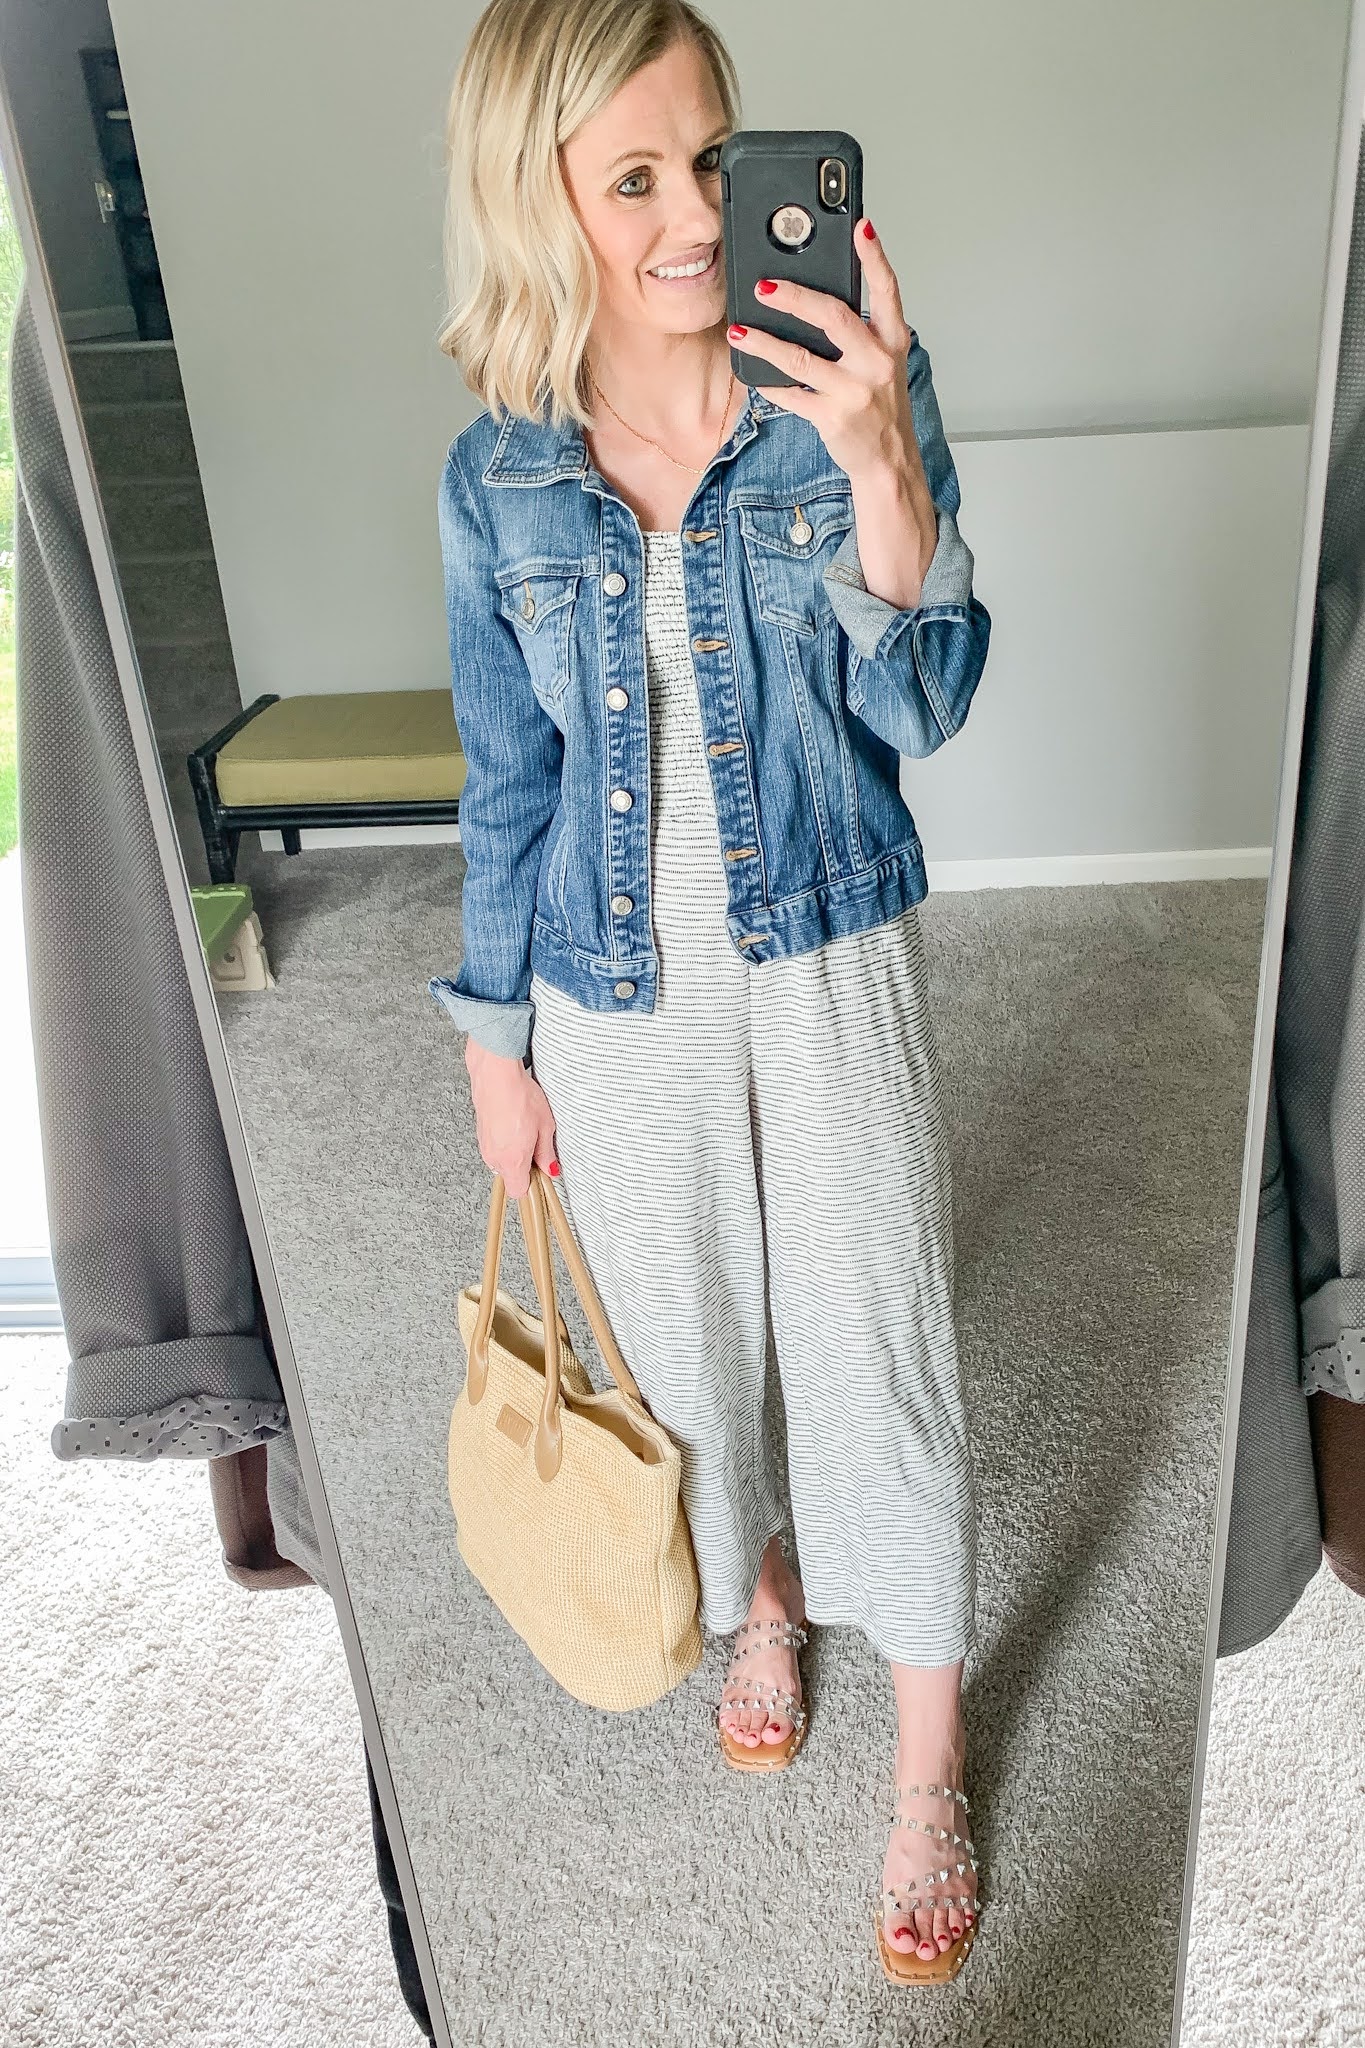 Affordable Girls Trip Outfit Ideas by Destination - Thrifty Wife